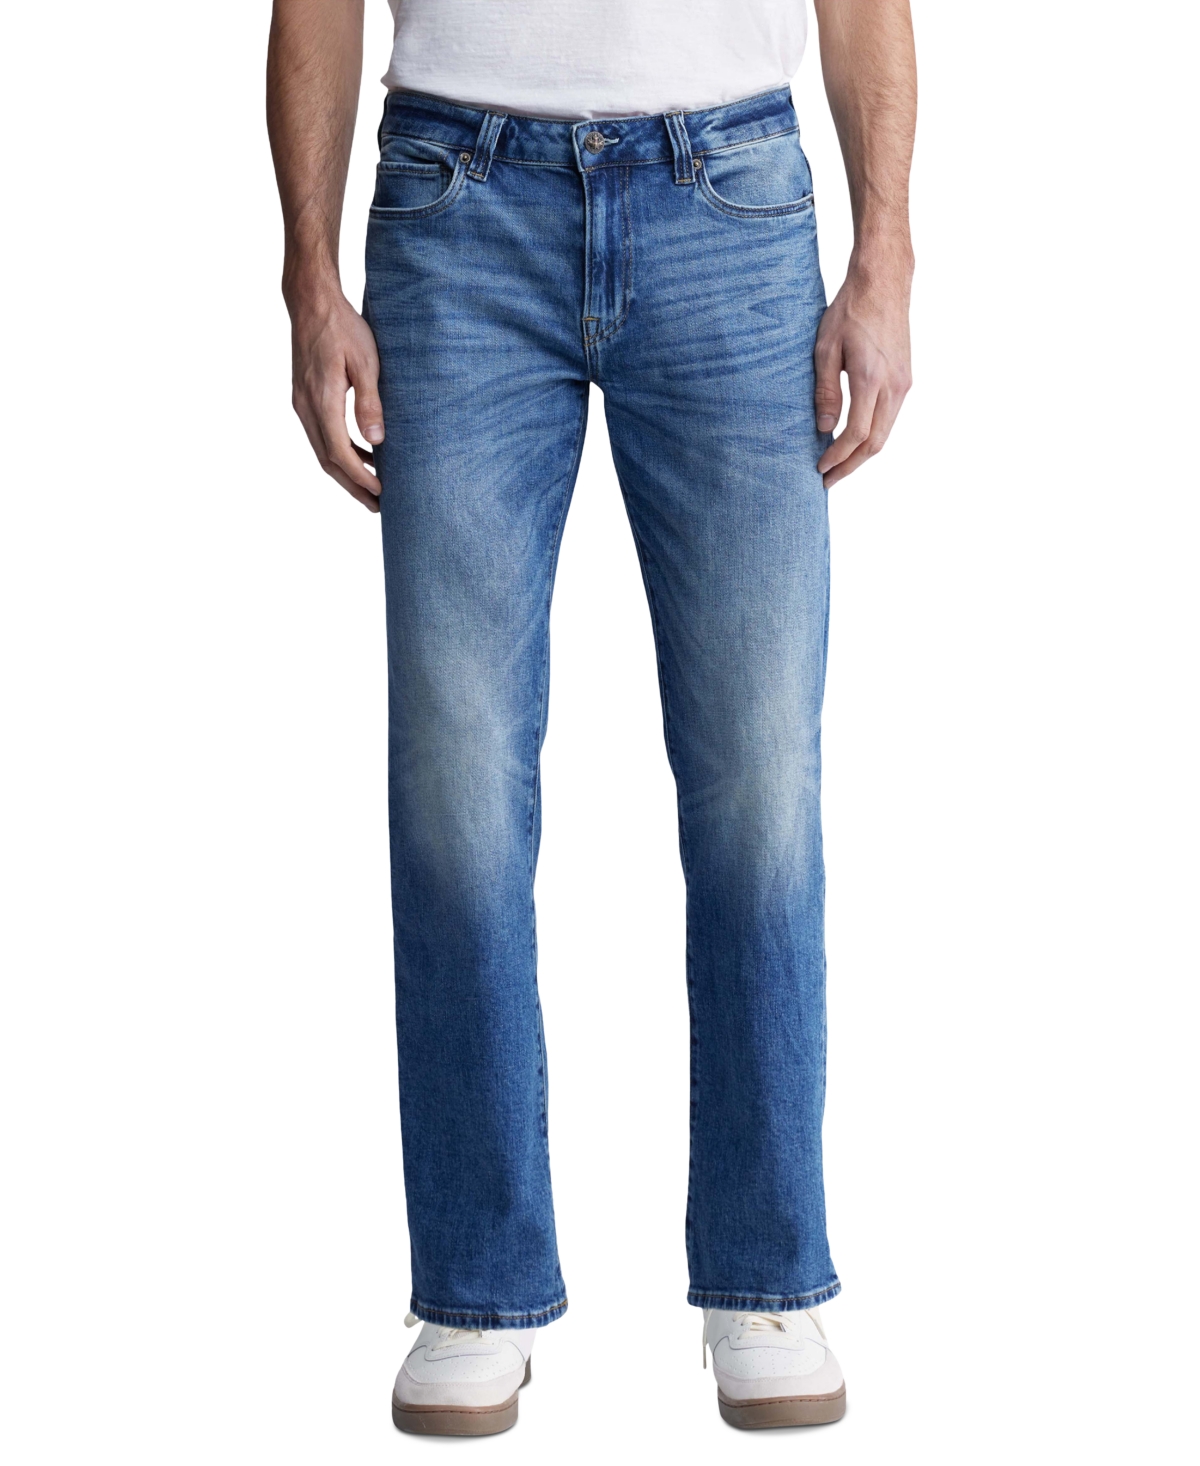 Men's Relaxed Straight Driven Jeans - Indigo